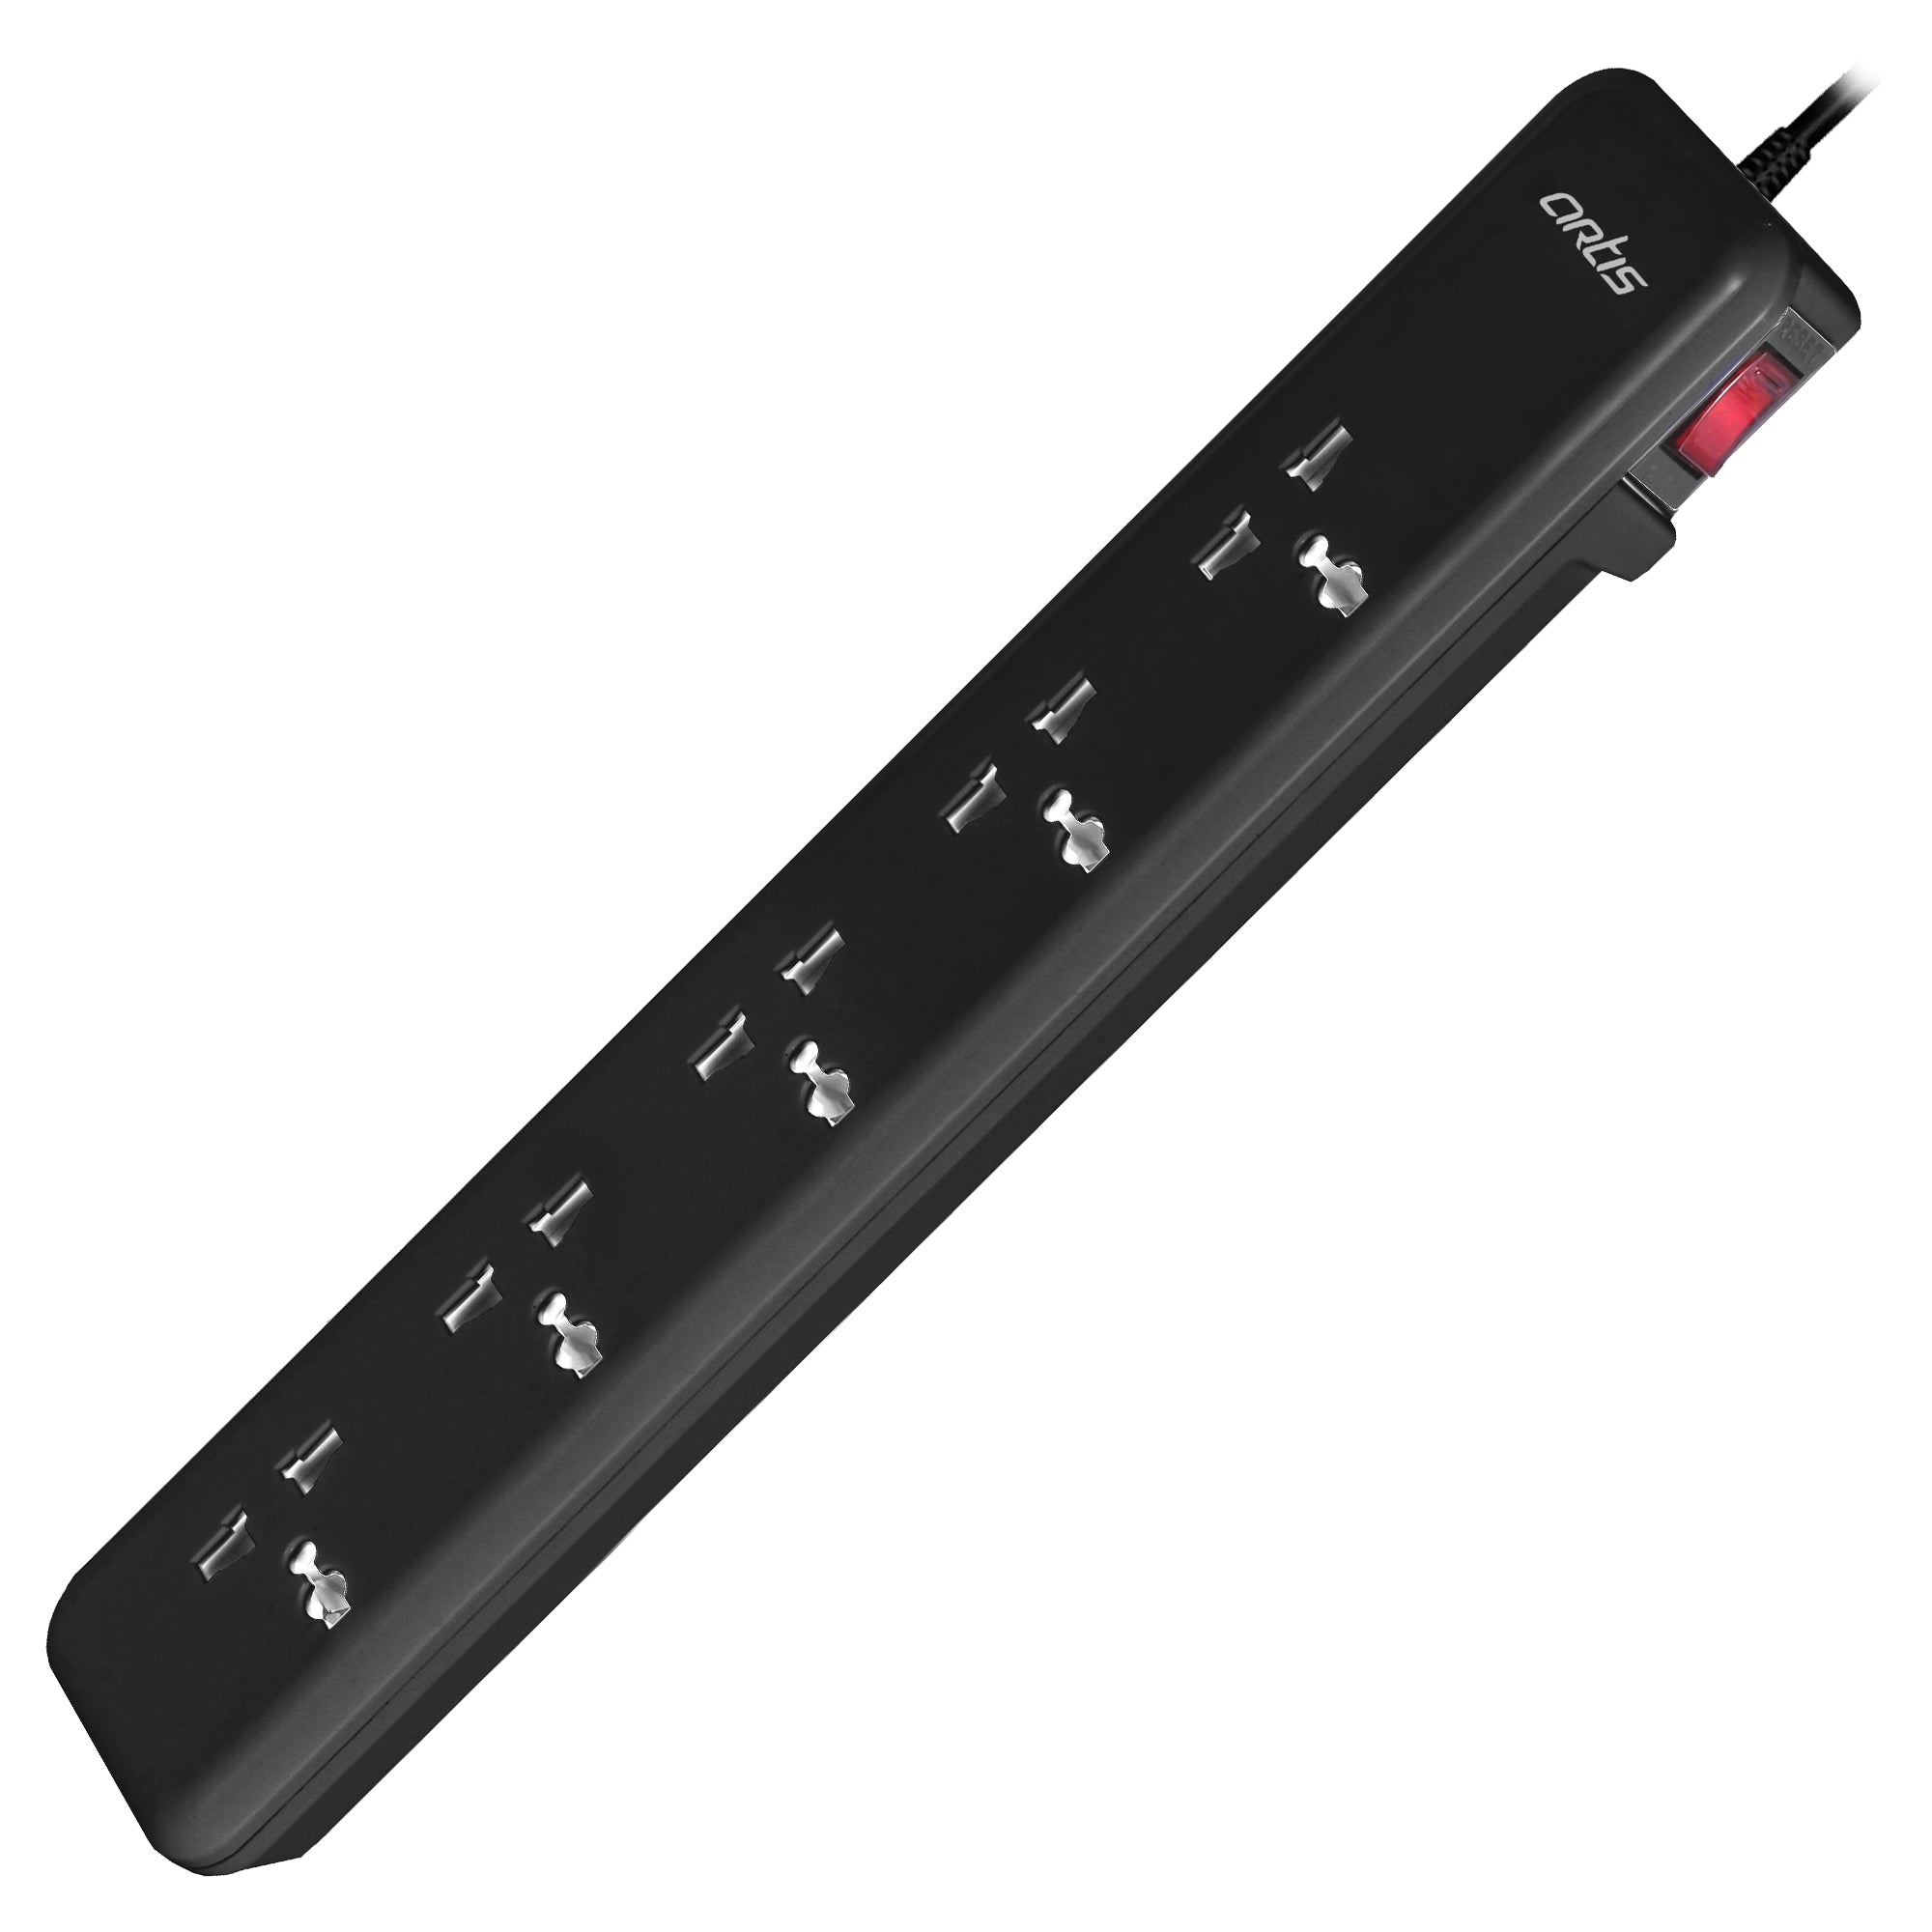 AR-5SS-CB 5 Universal Sockets Surge Protector with Single Switch